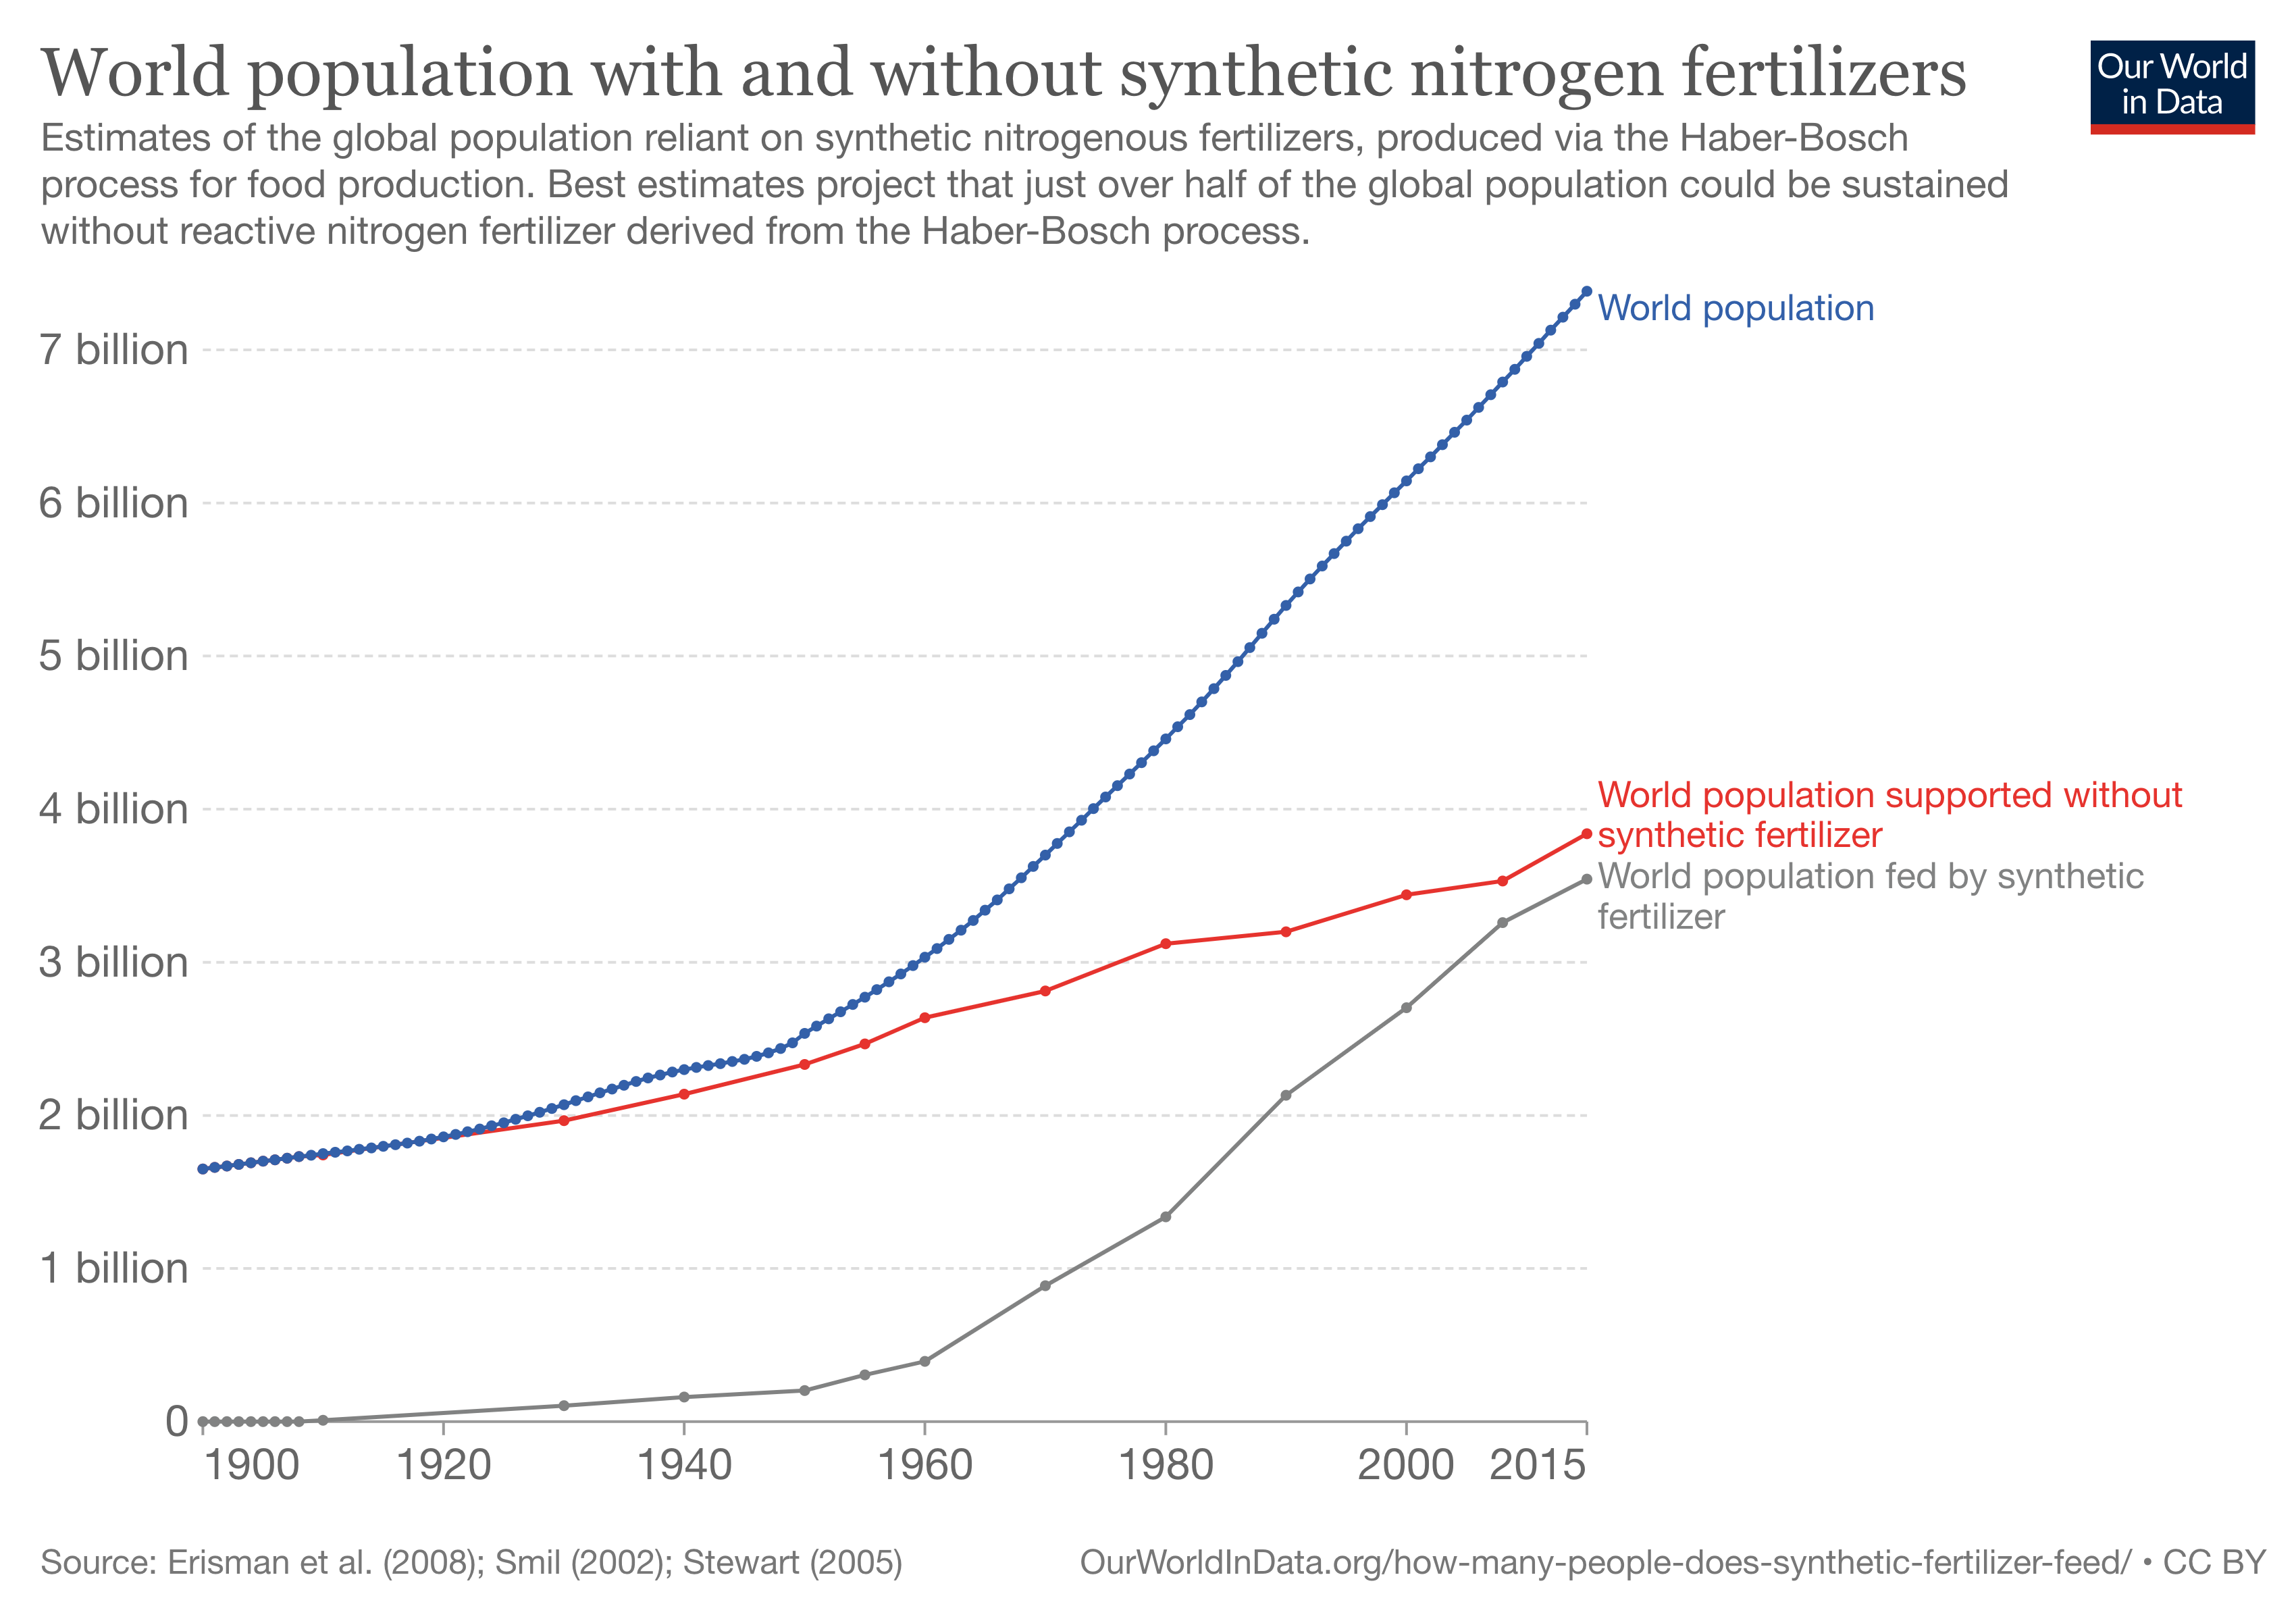 world-population-with-and-without-fertilizer.png